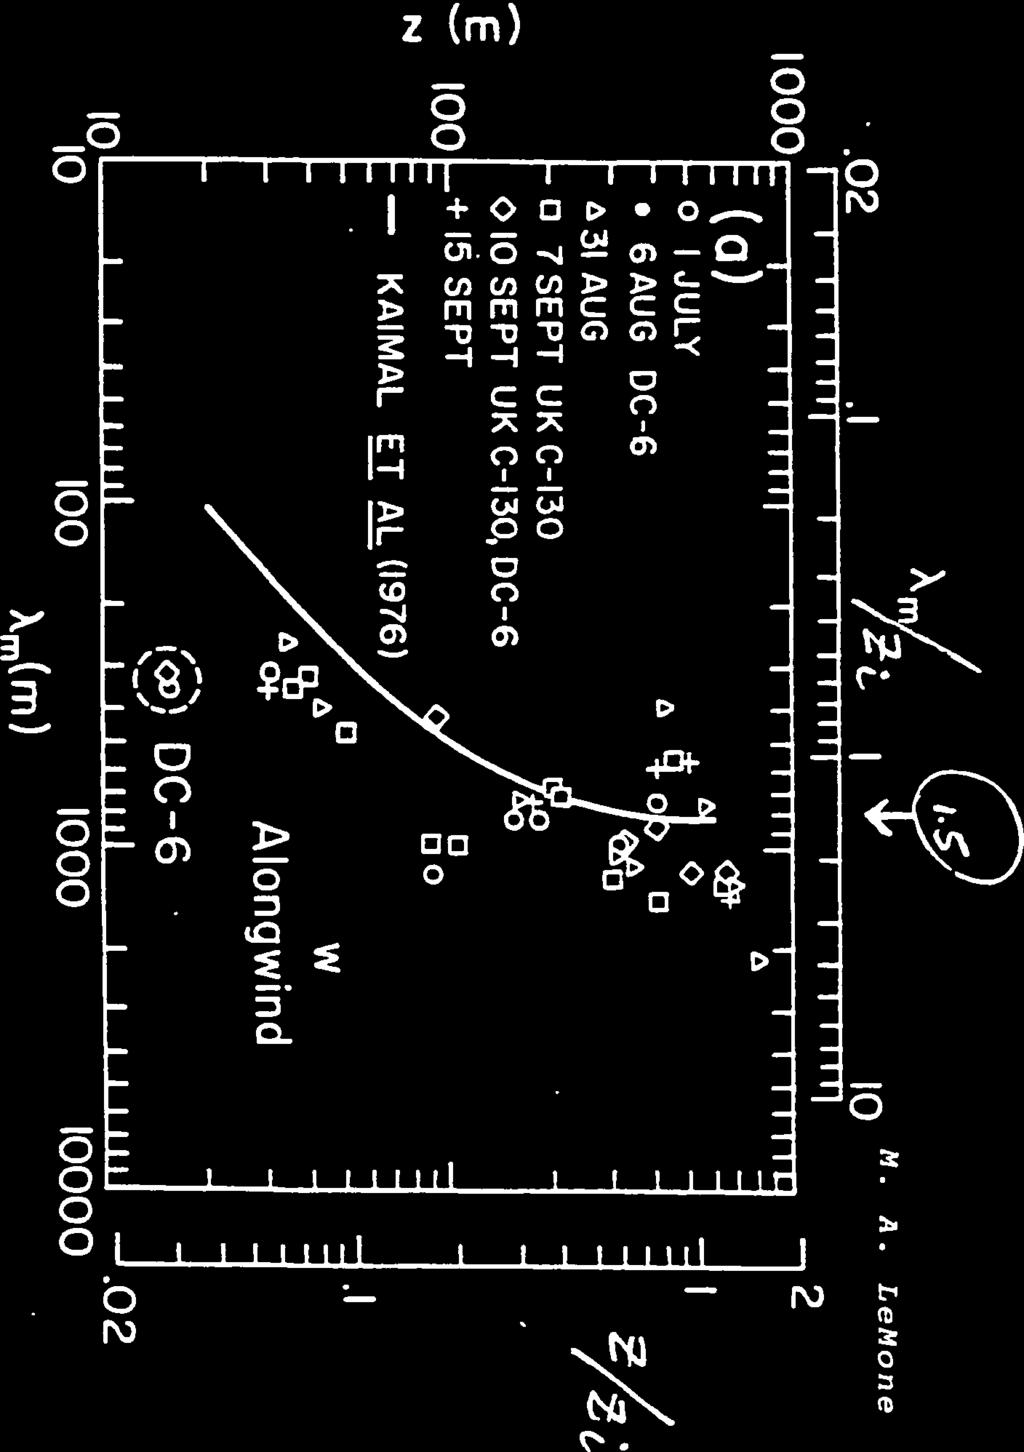 Figure 3.13 (SOURCE: LeMone 1980) measurements) and time fluctuations (balloon measurements); or (3) existence of roll vortices (these rolls have a typical size of 2-3 z i ) in the GATE area.